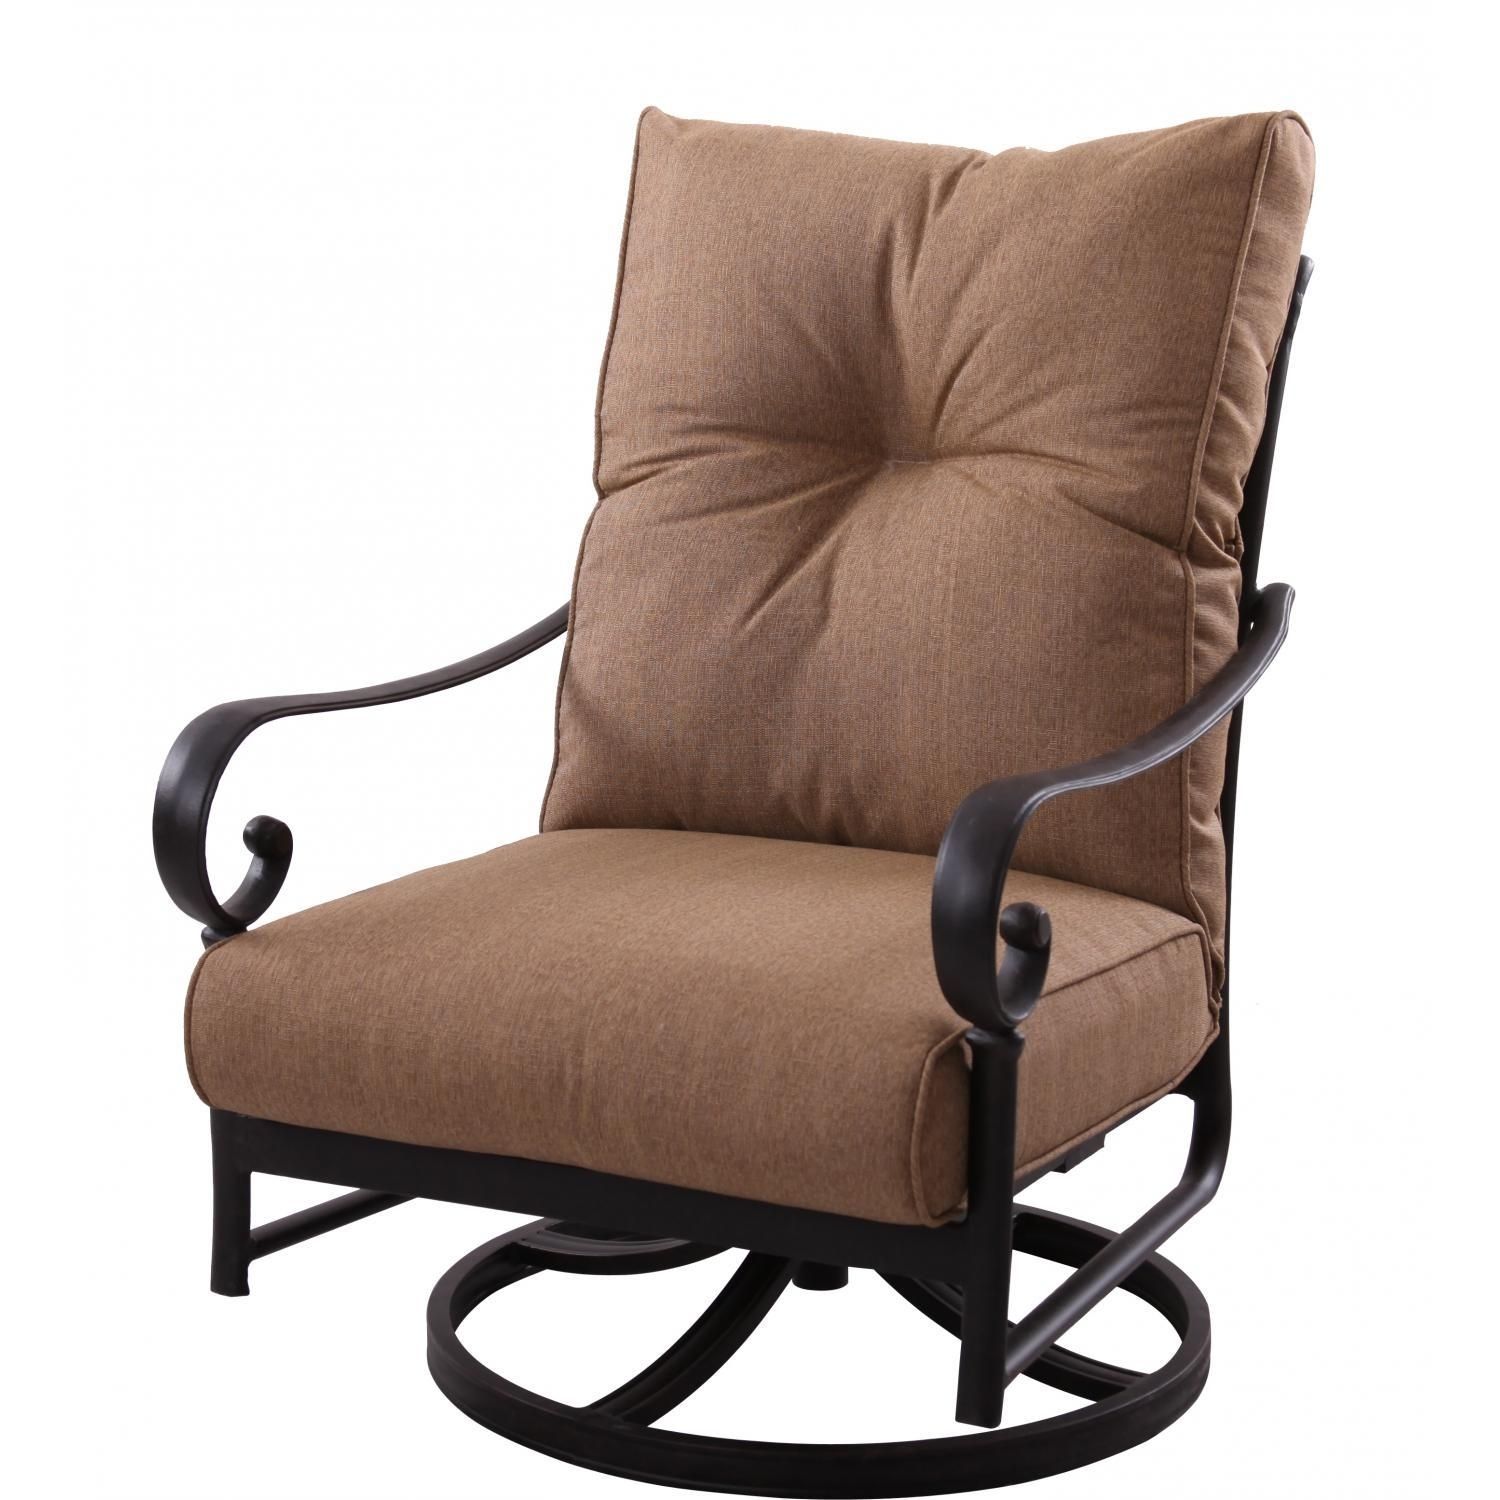 15 Best Collection of Patio Rocking Chairs with Covers